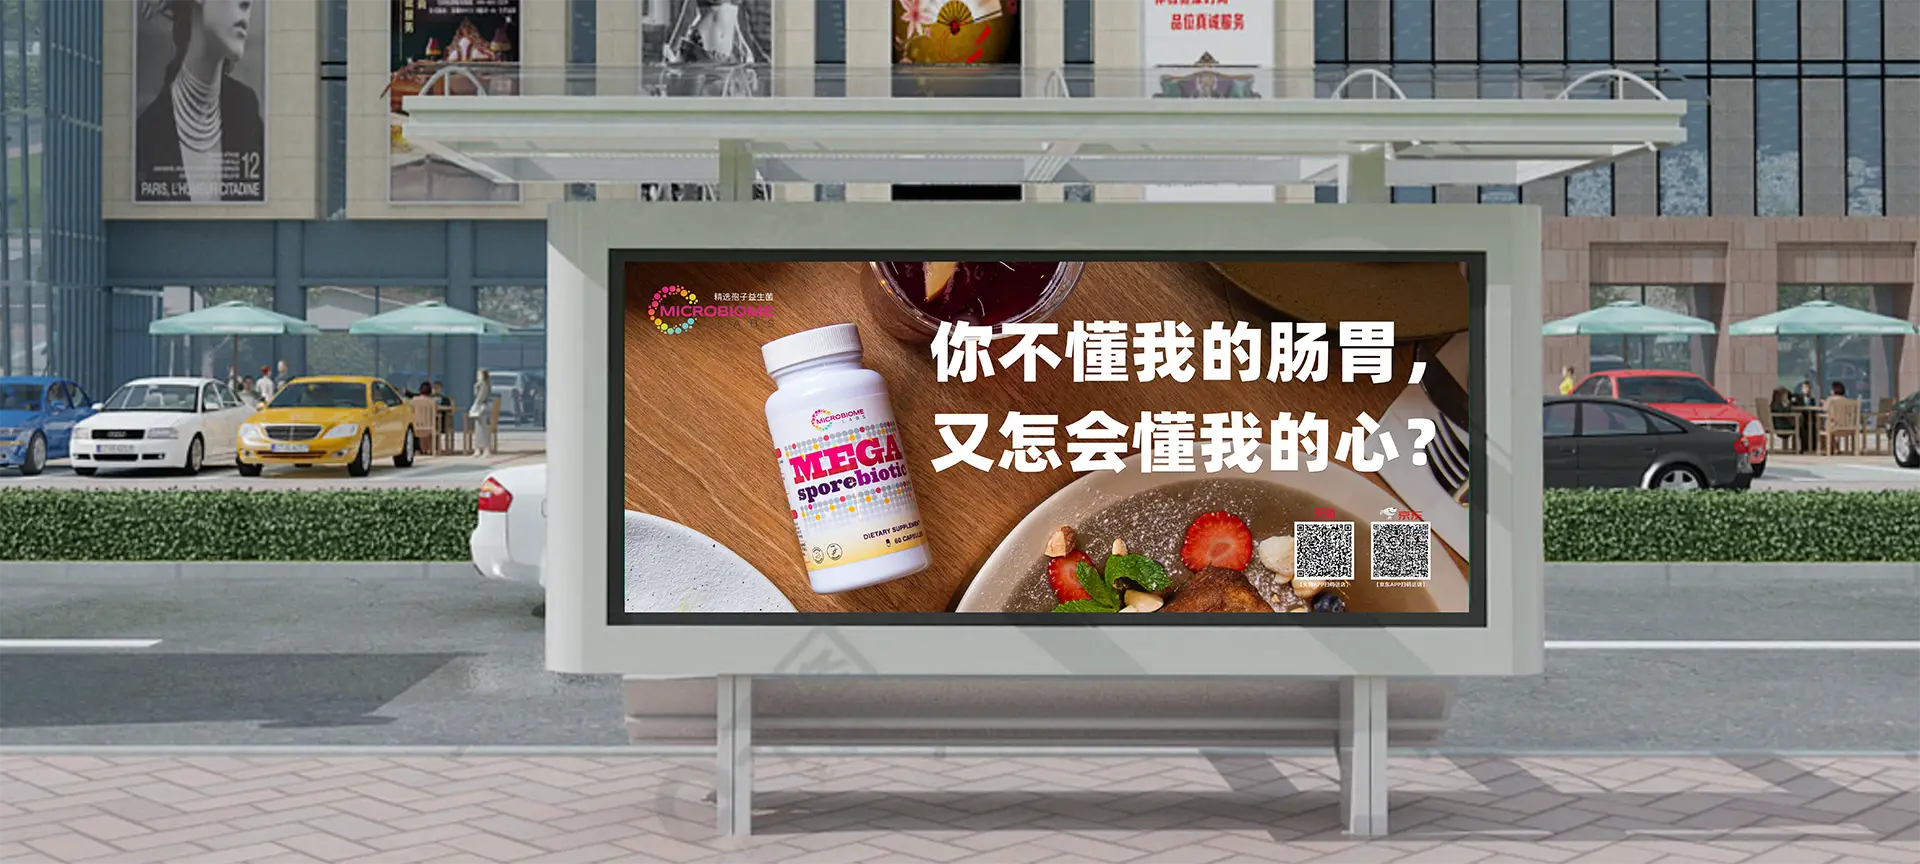 Microbiome Labs - China ads